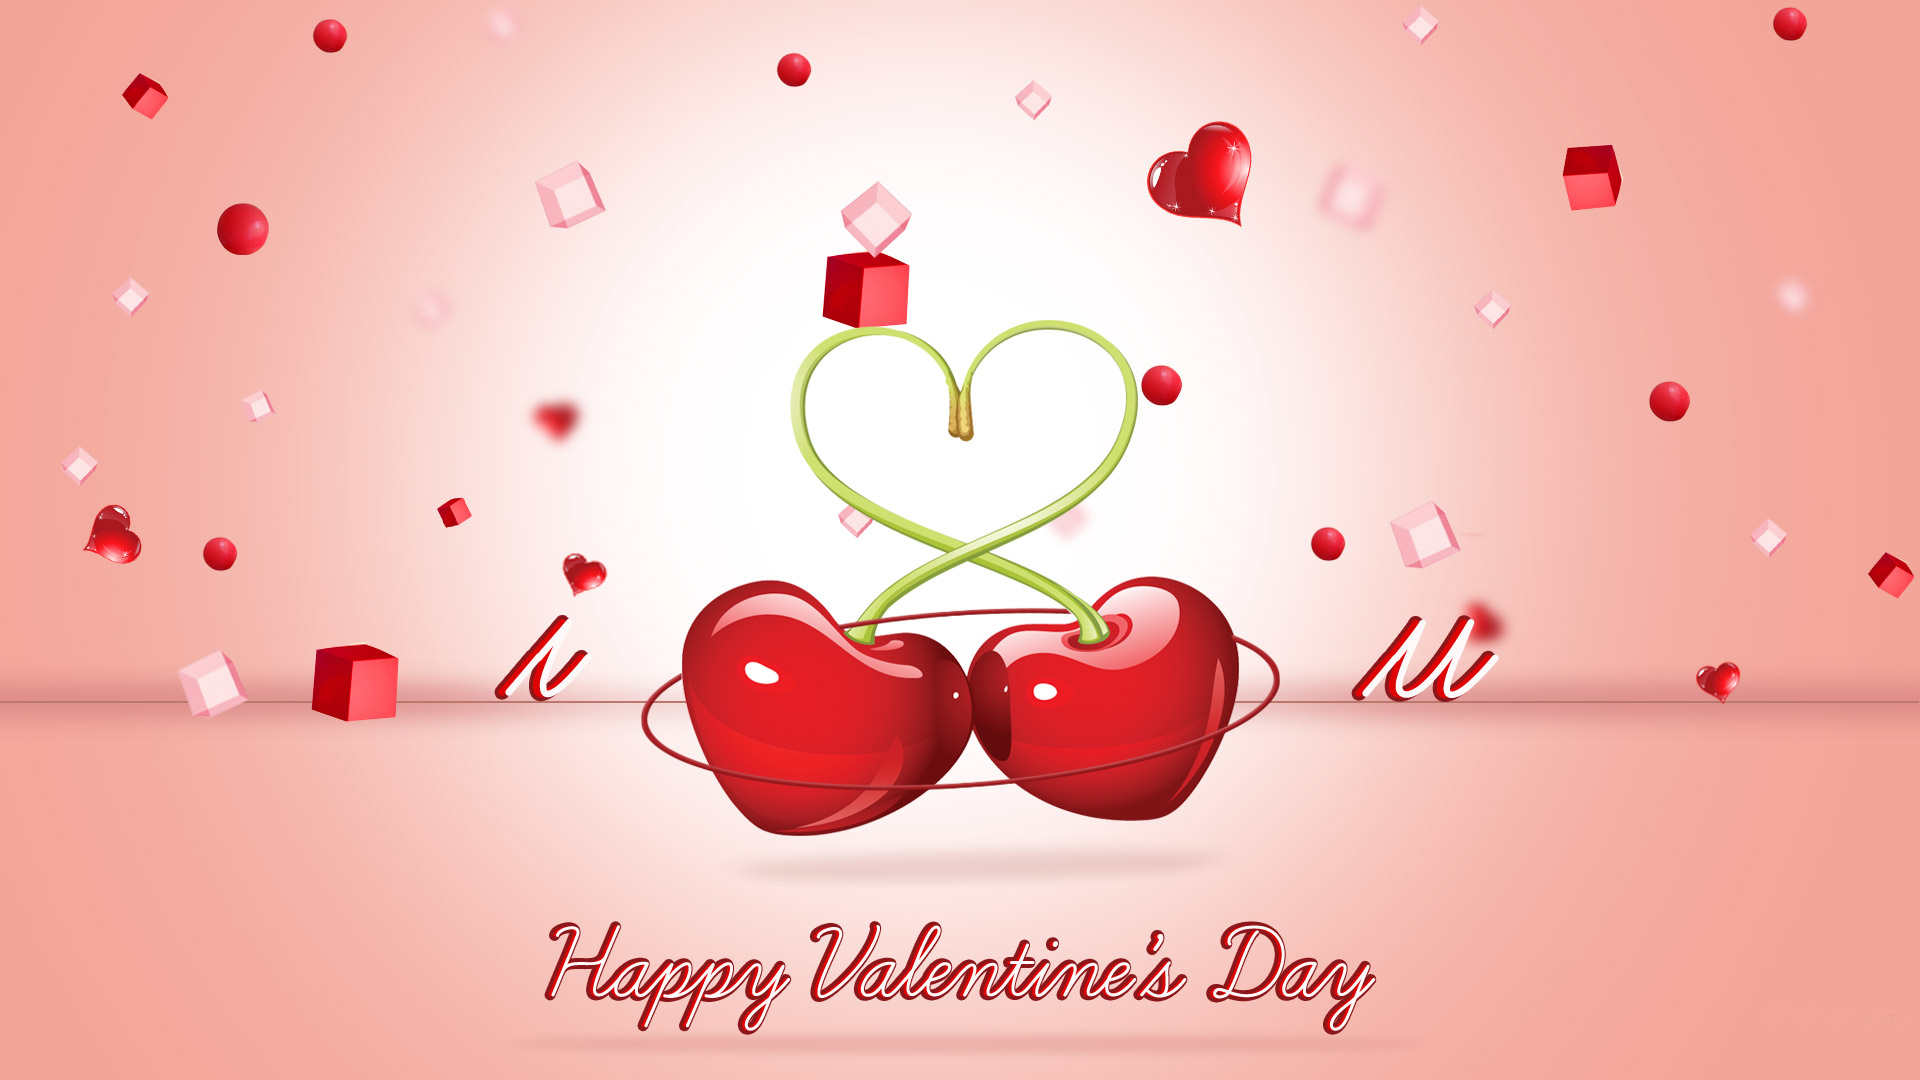 Happy Valentines Day Background Image Amp Pictures Becuo